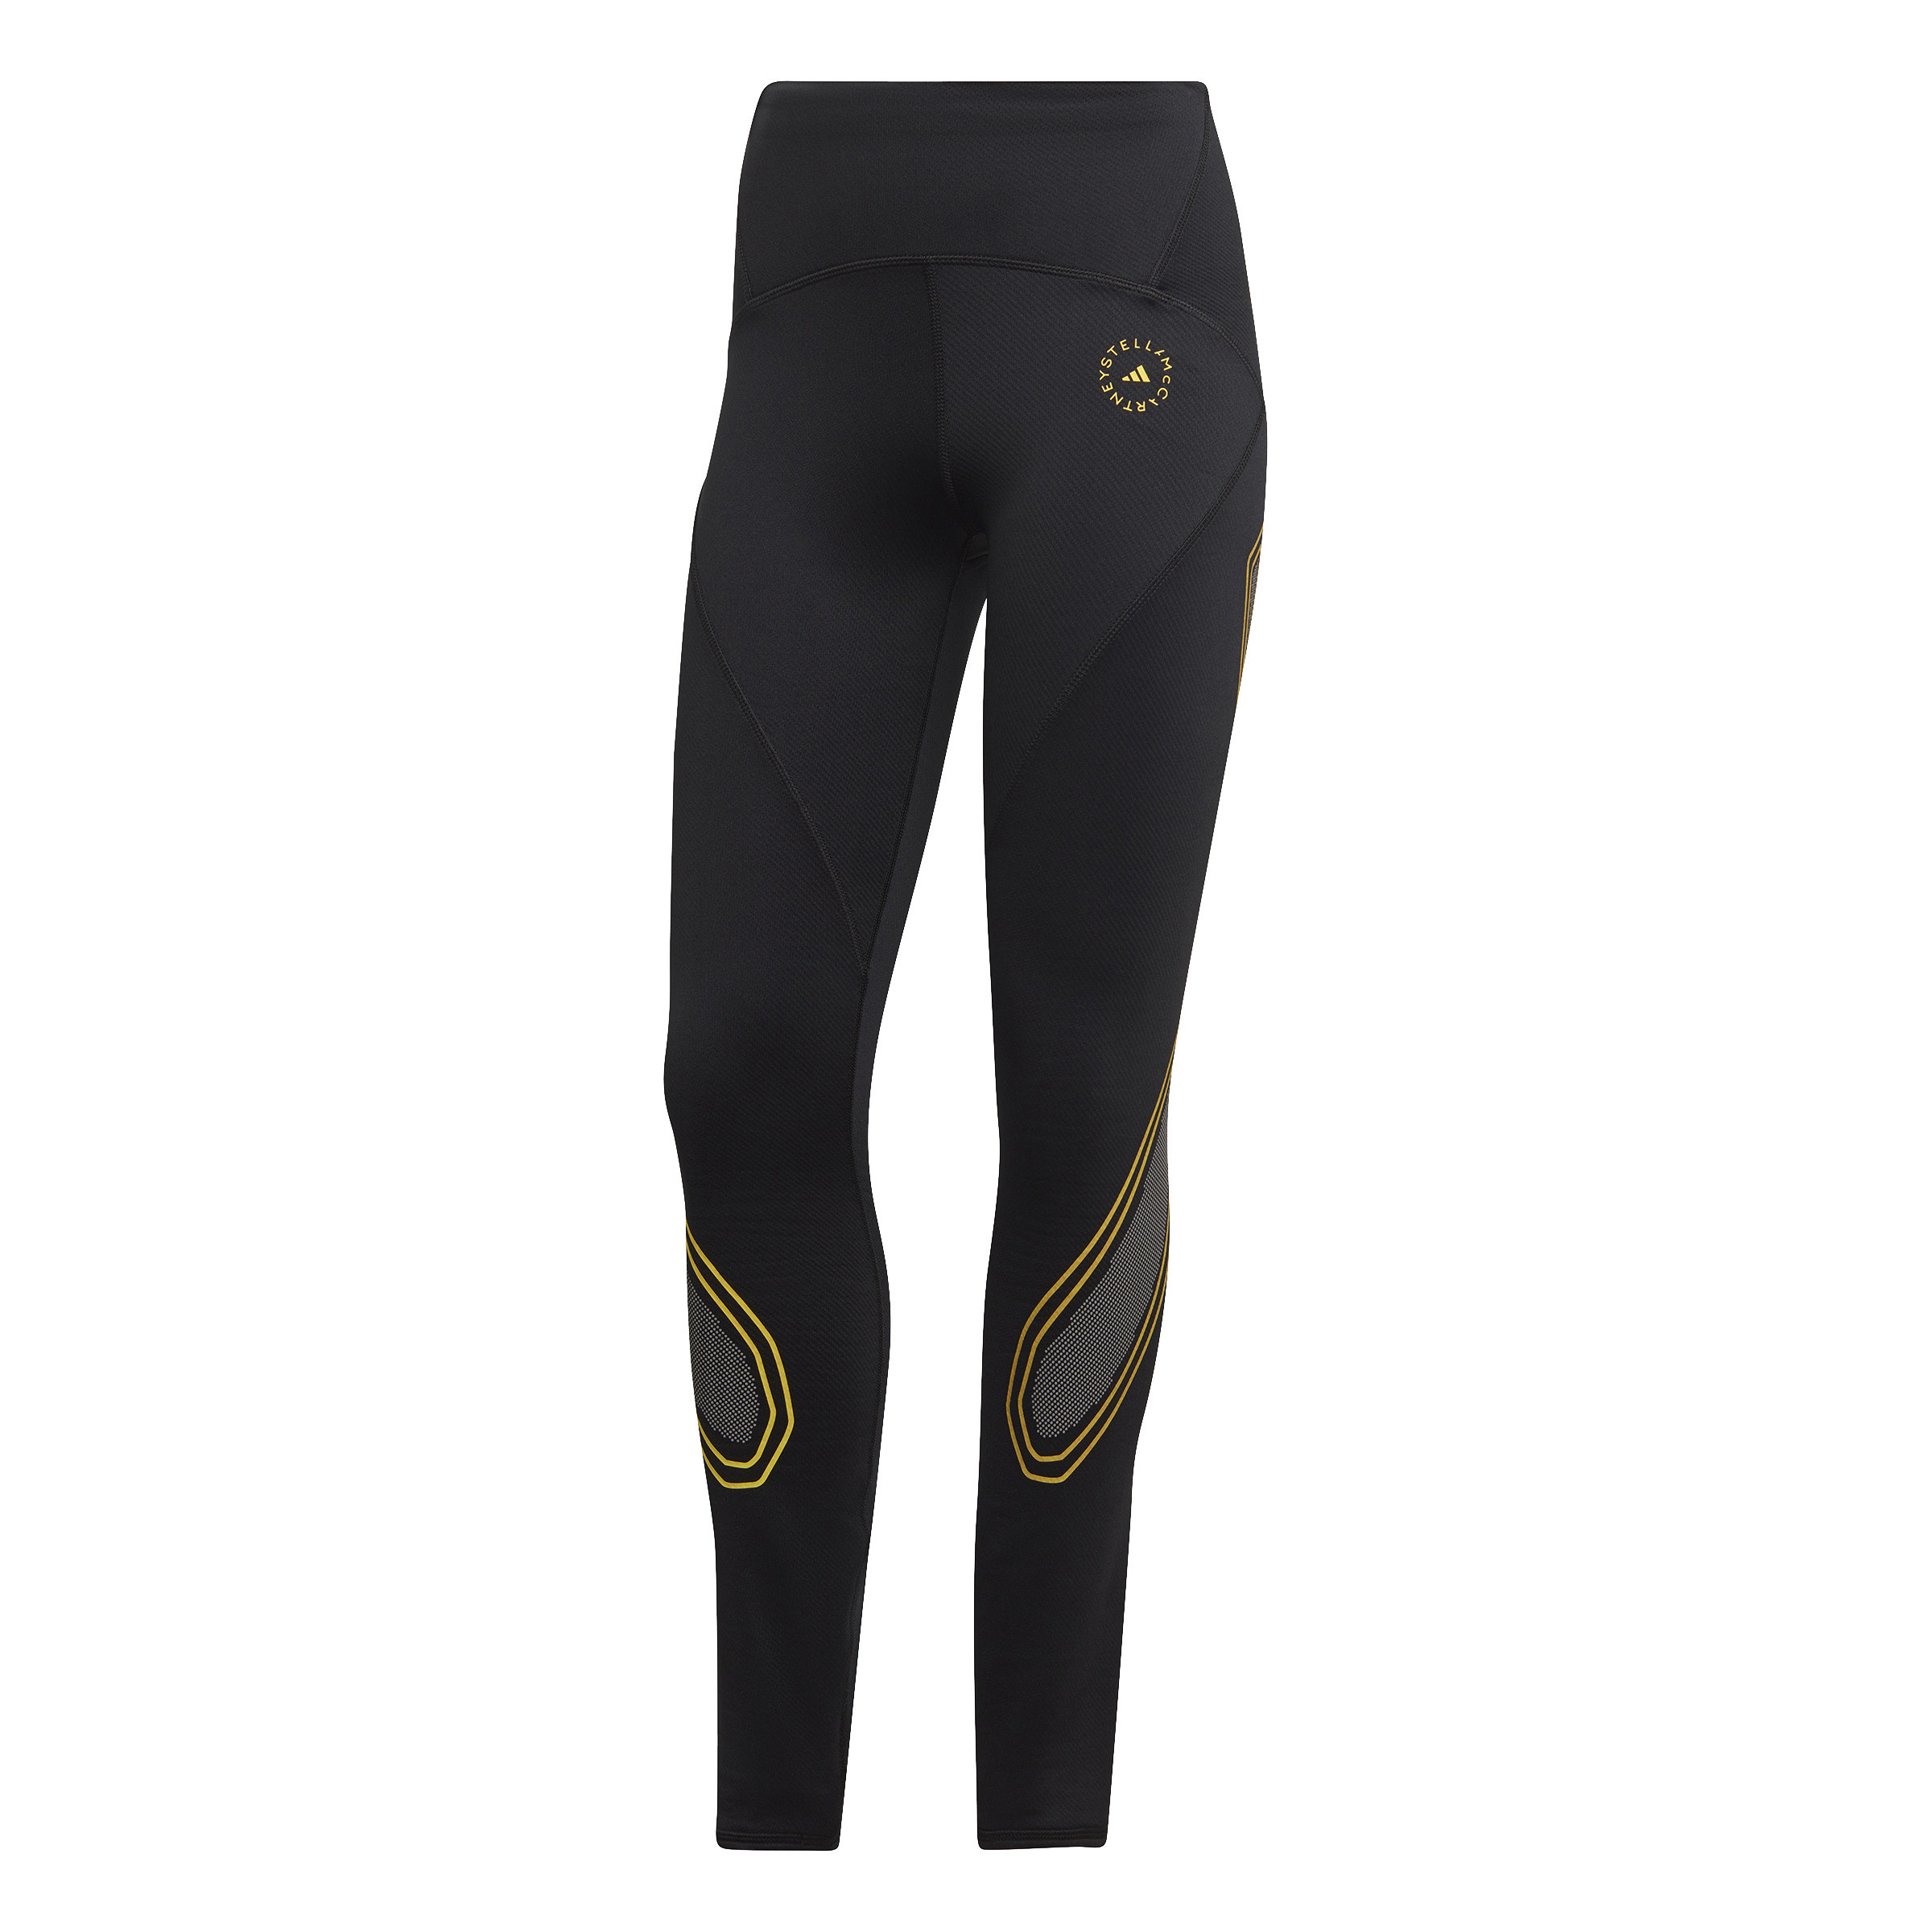 Adidas by Stella McCartney - TruePace COLD.RDY running leggings, Black, large image number 0